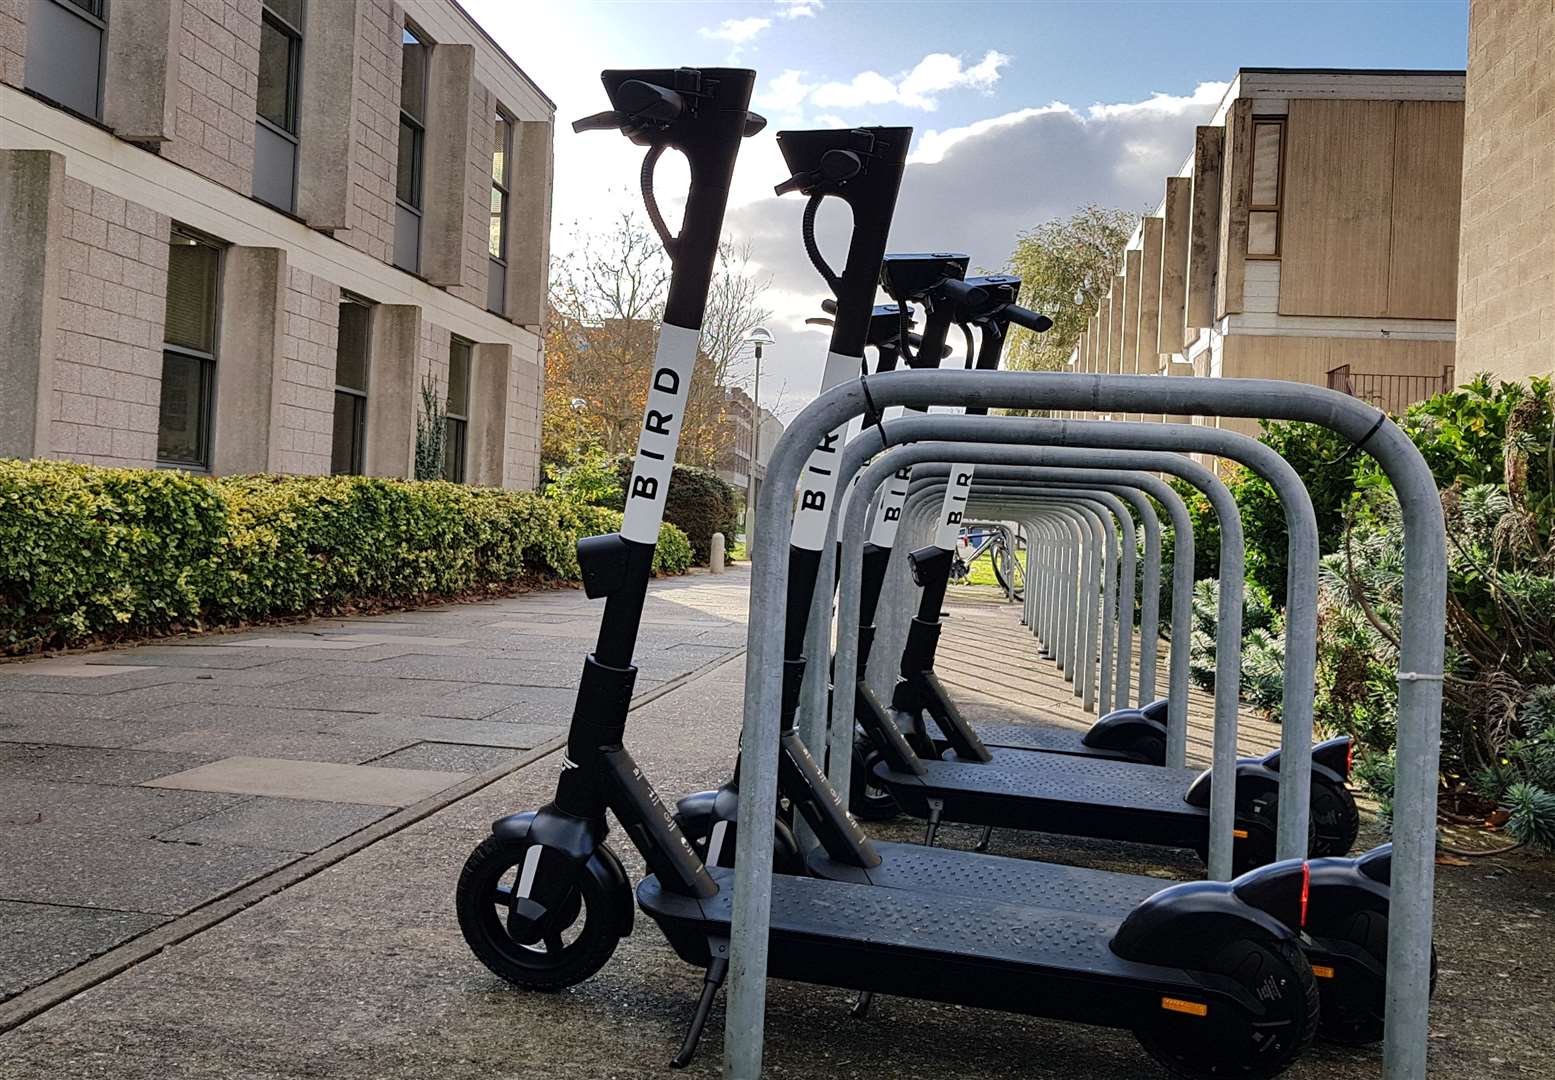 Bird e-scooters were recently rolled out at the University of Kent. Mrs Lilford was hit by a privately-owned scooter